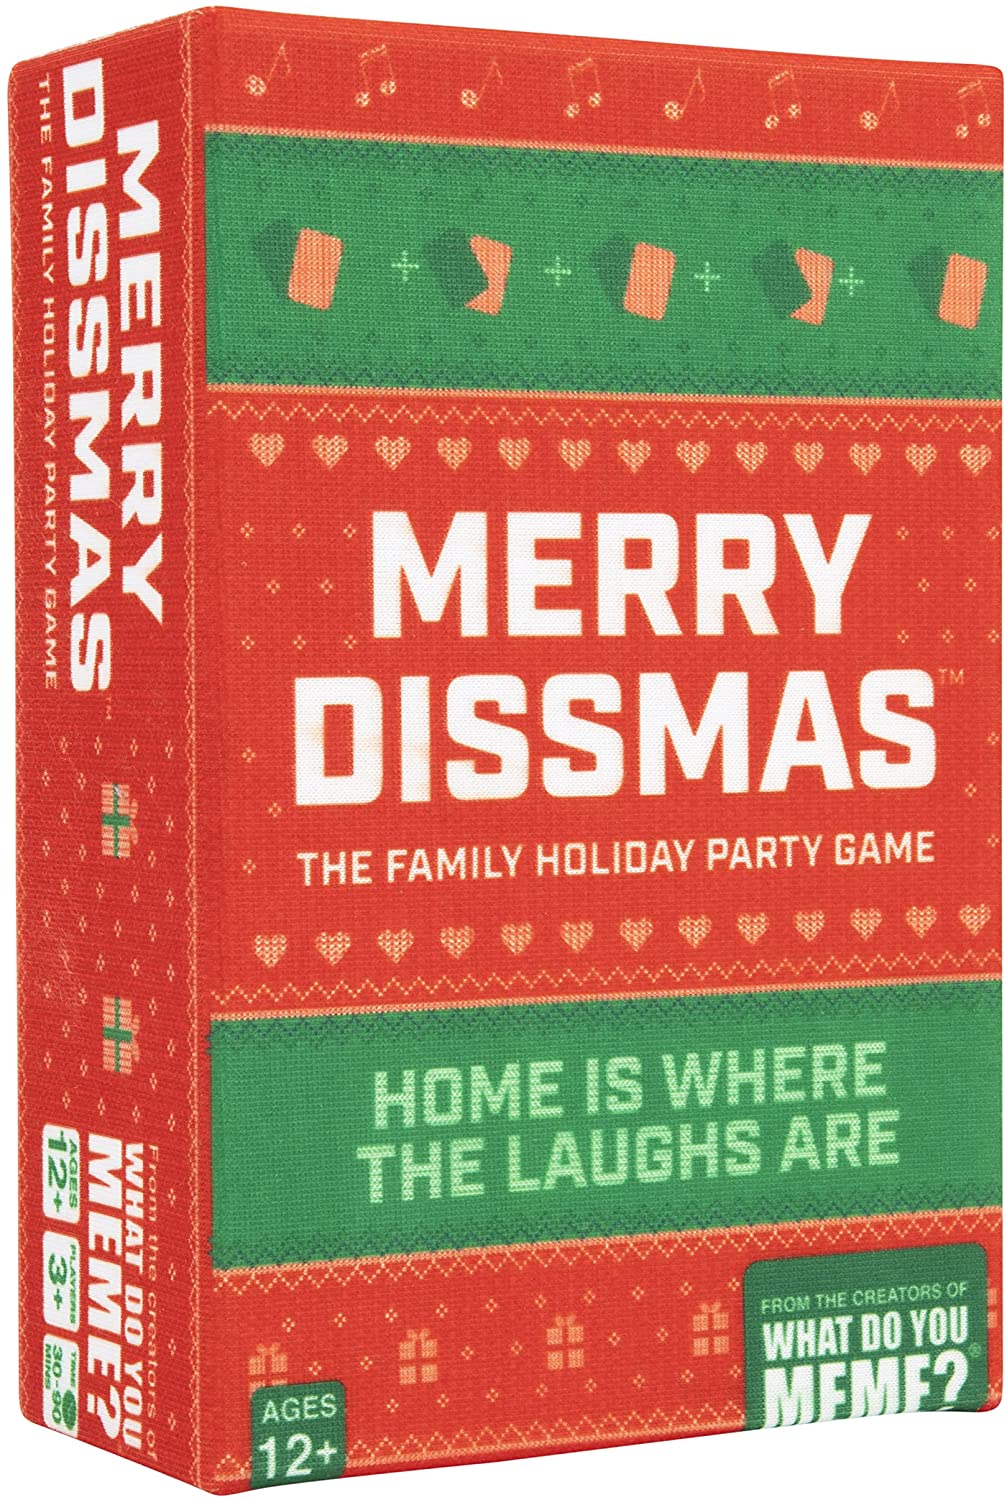 Merry Dissmas - the Holiday Family Party Game from What Do You Meme? - image 1 of 8